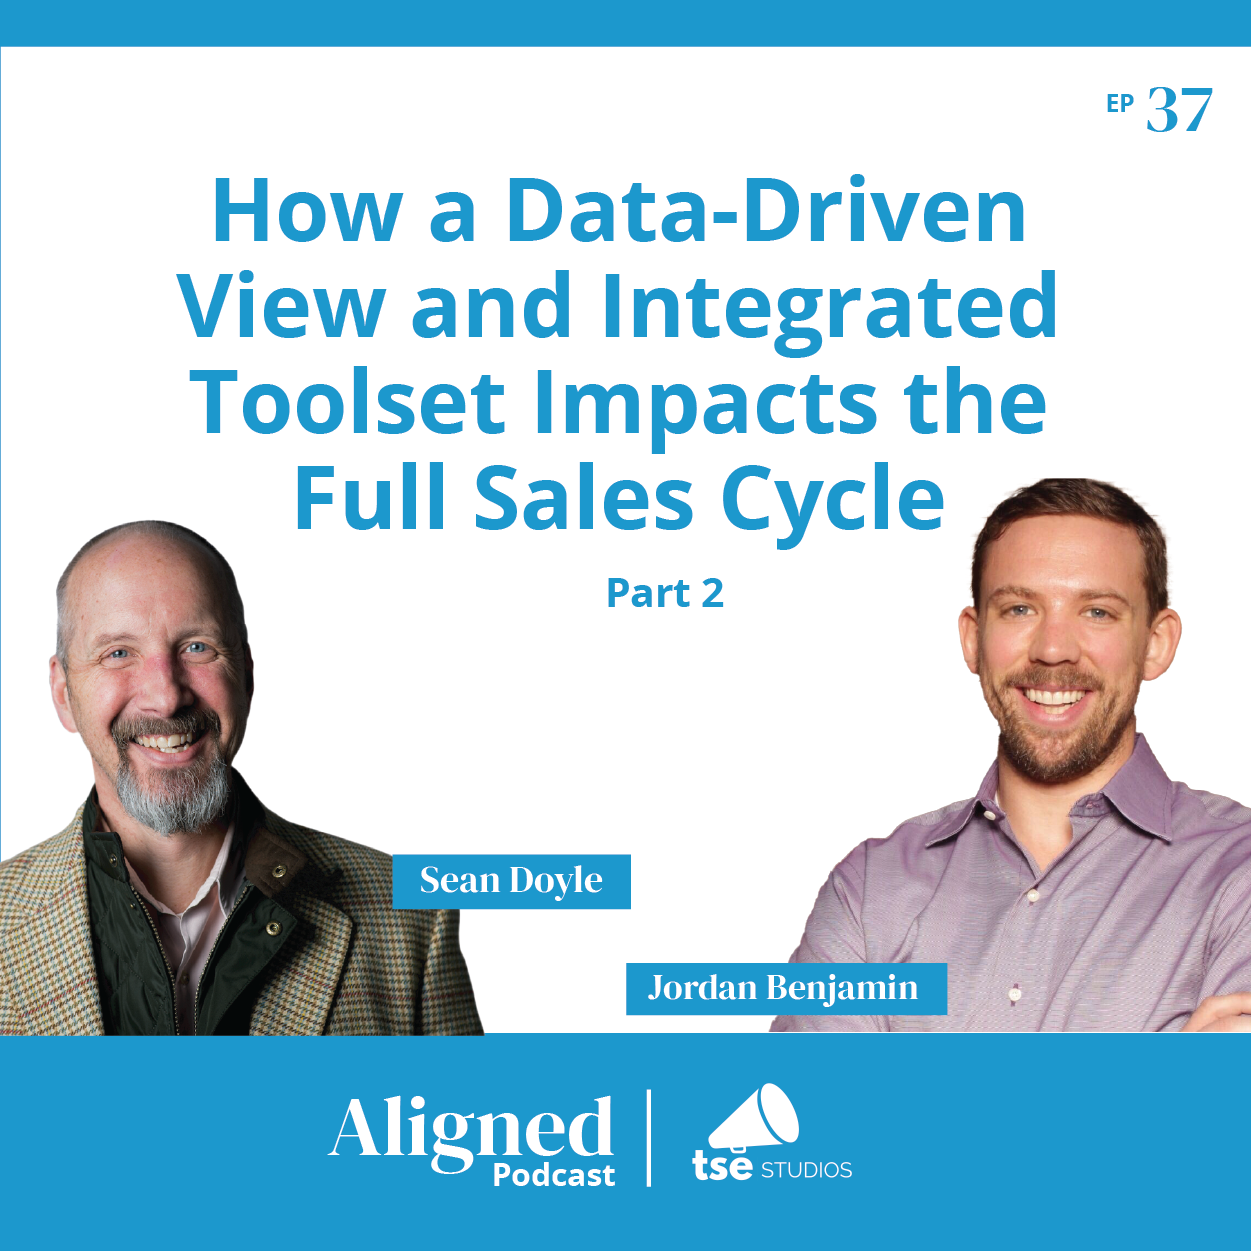 How a Data-Driven View and Integrated Toolset Impacts the Full Sales Cycle - Part 2